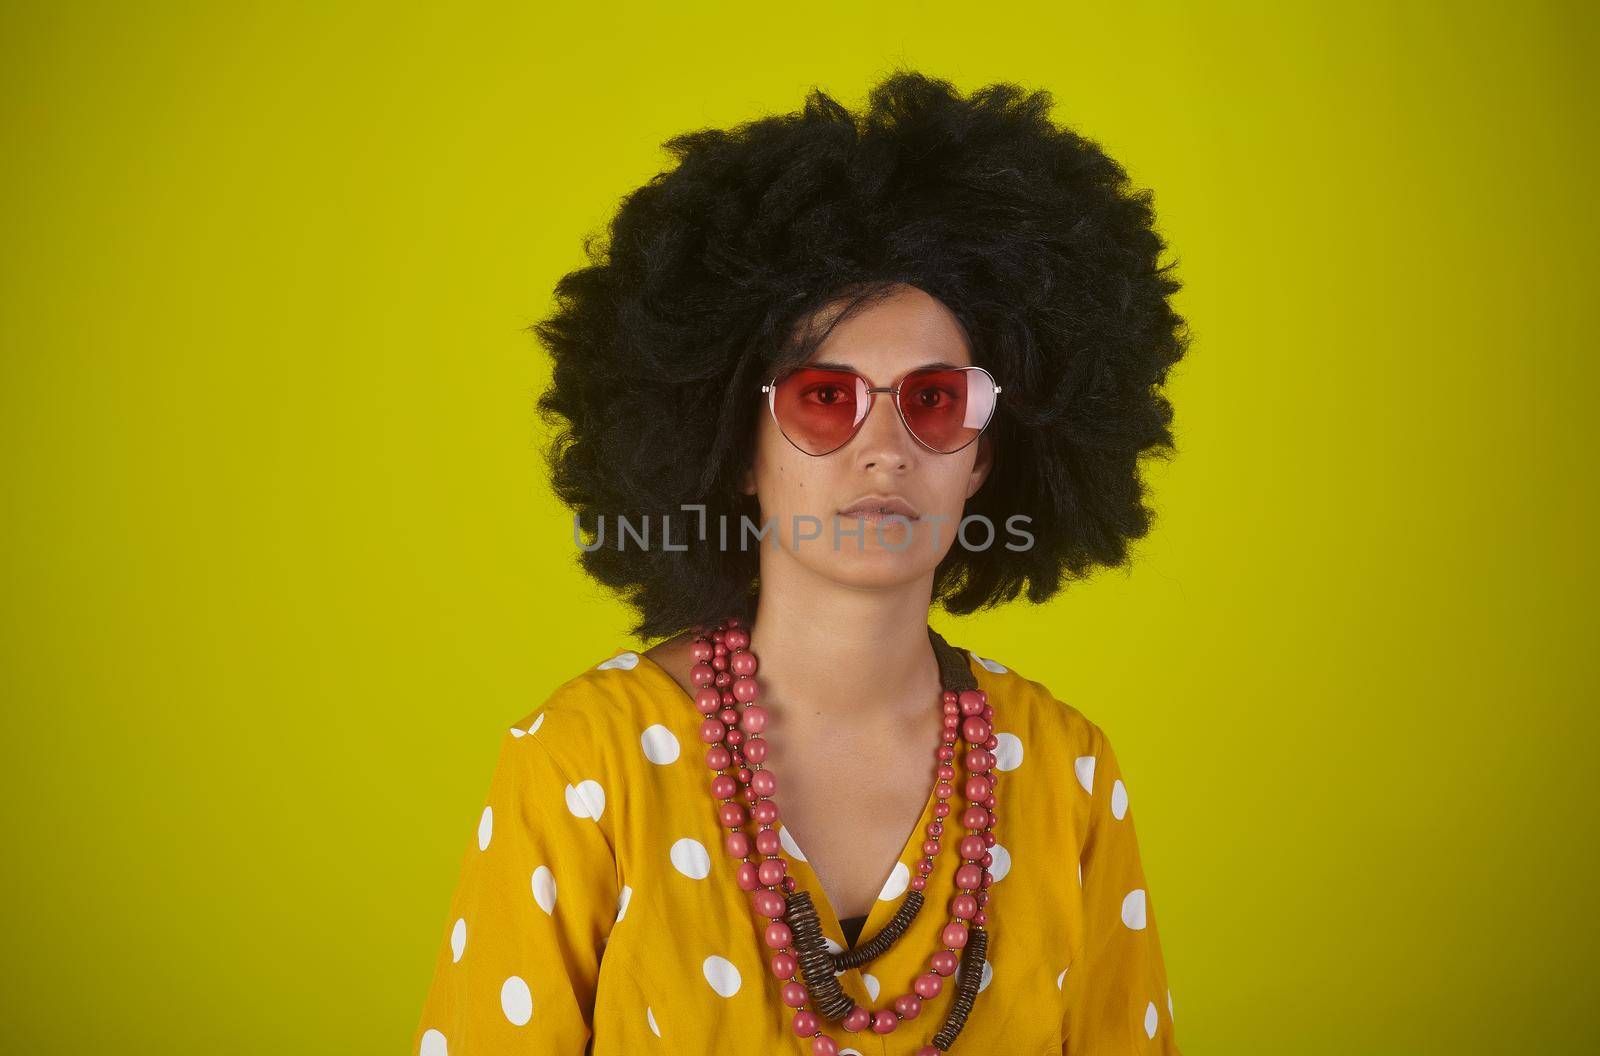 A beautiful woman with the curly afro hairstyle wearing sunglasses on yellow background by bepsimage